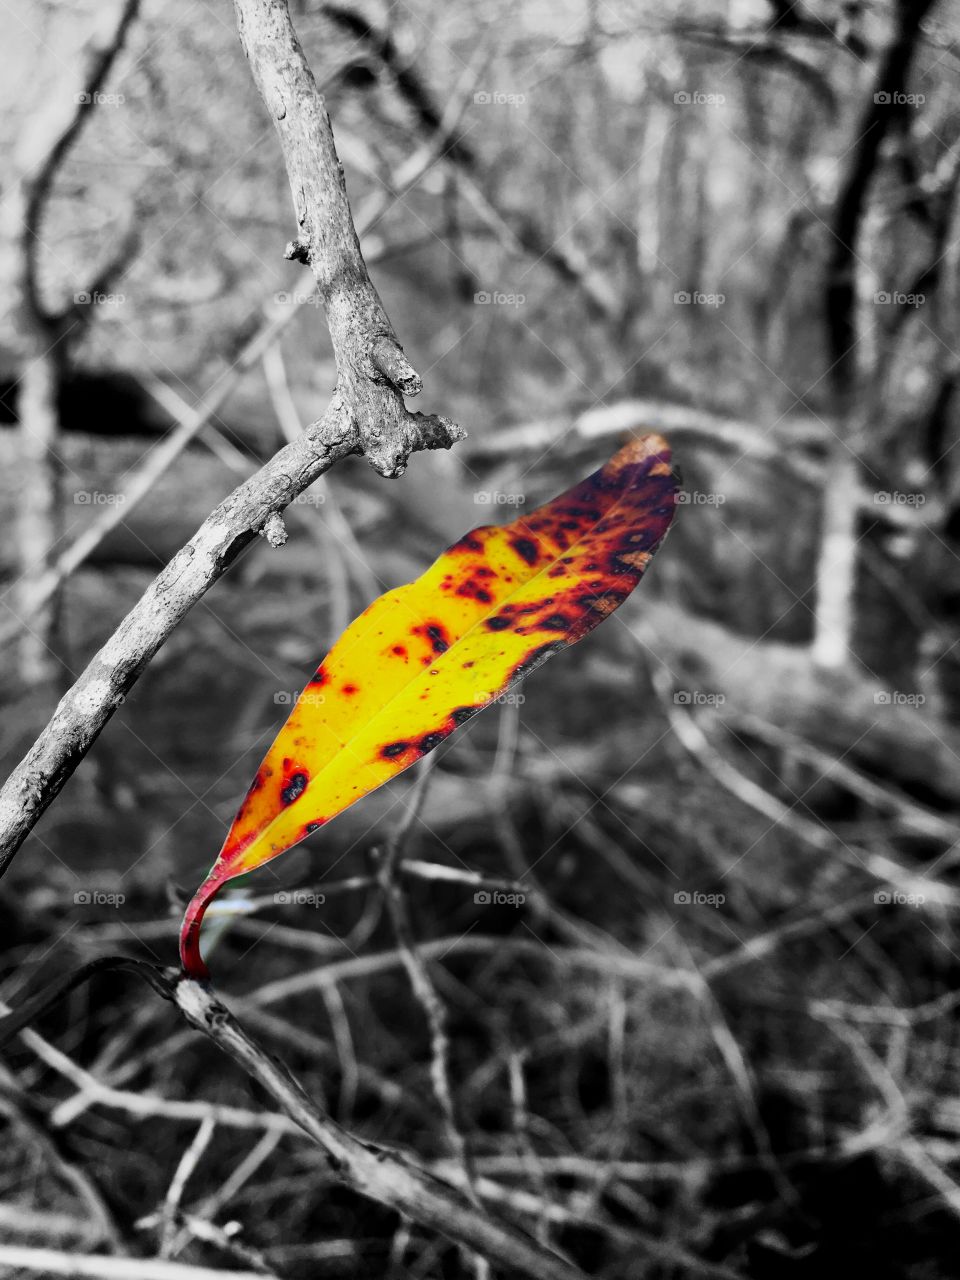 Color pop of s single vivid leaf during winter in the forest 